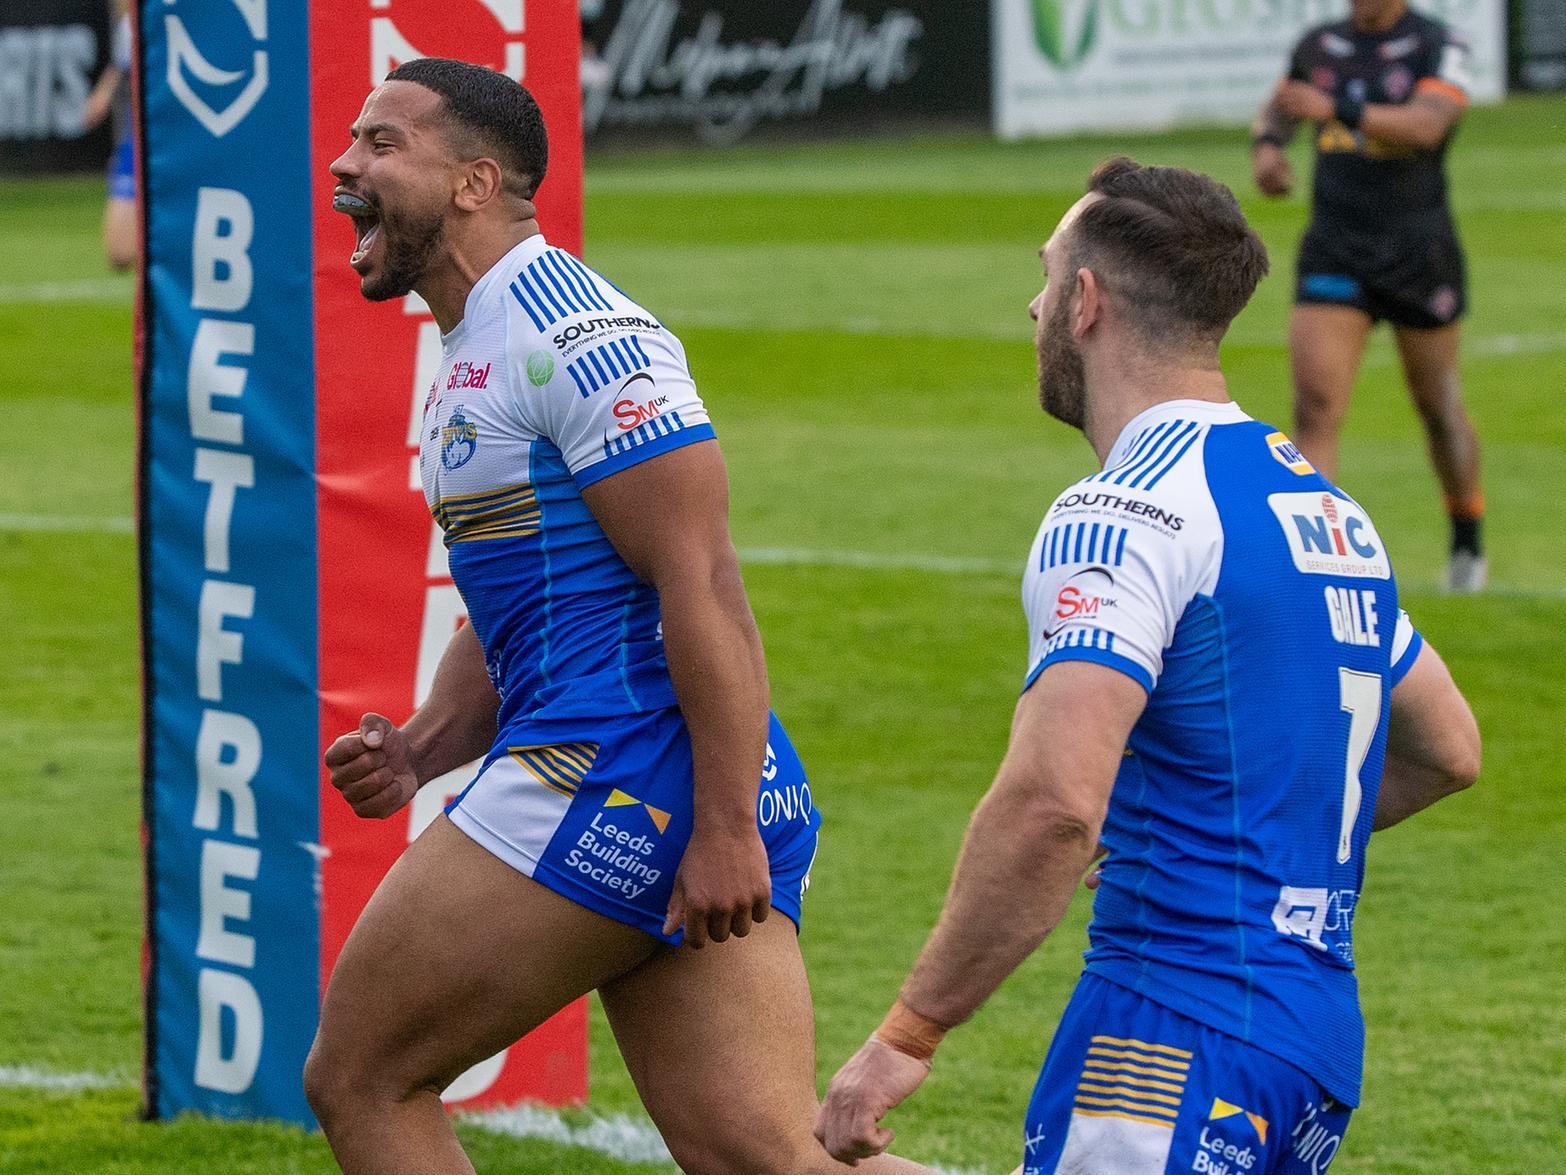 Leeds Rhinos comment Why the decision to postpone Salford Red Devils game for two days was right and unavoidable